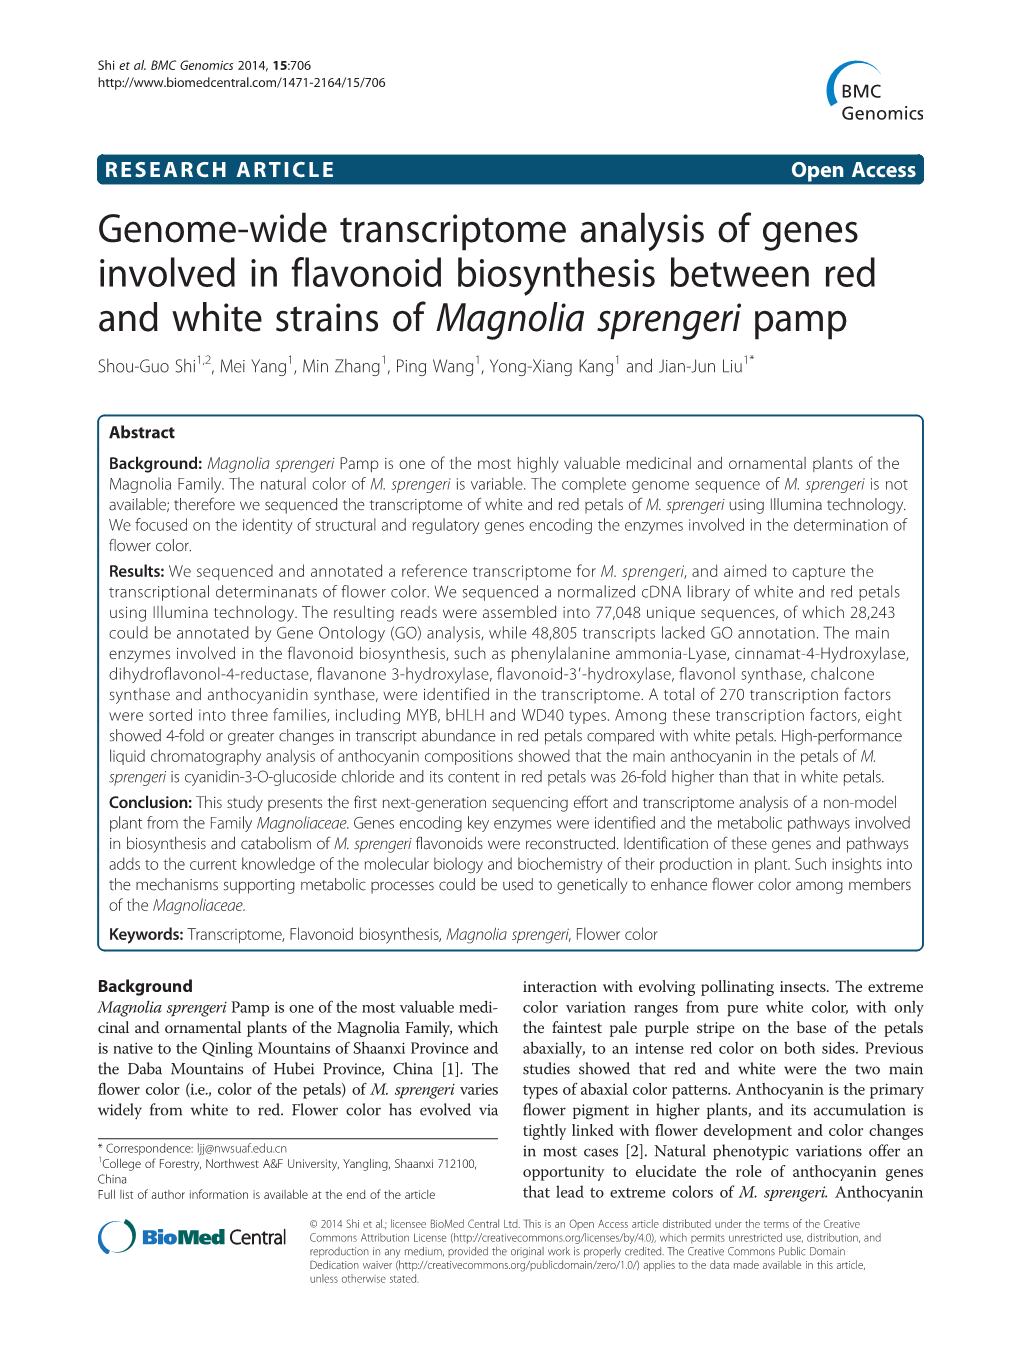 Genome-Wide Transcriptome Analysis of Genes Involved in Flavonoid